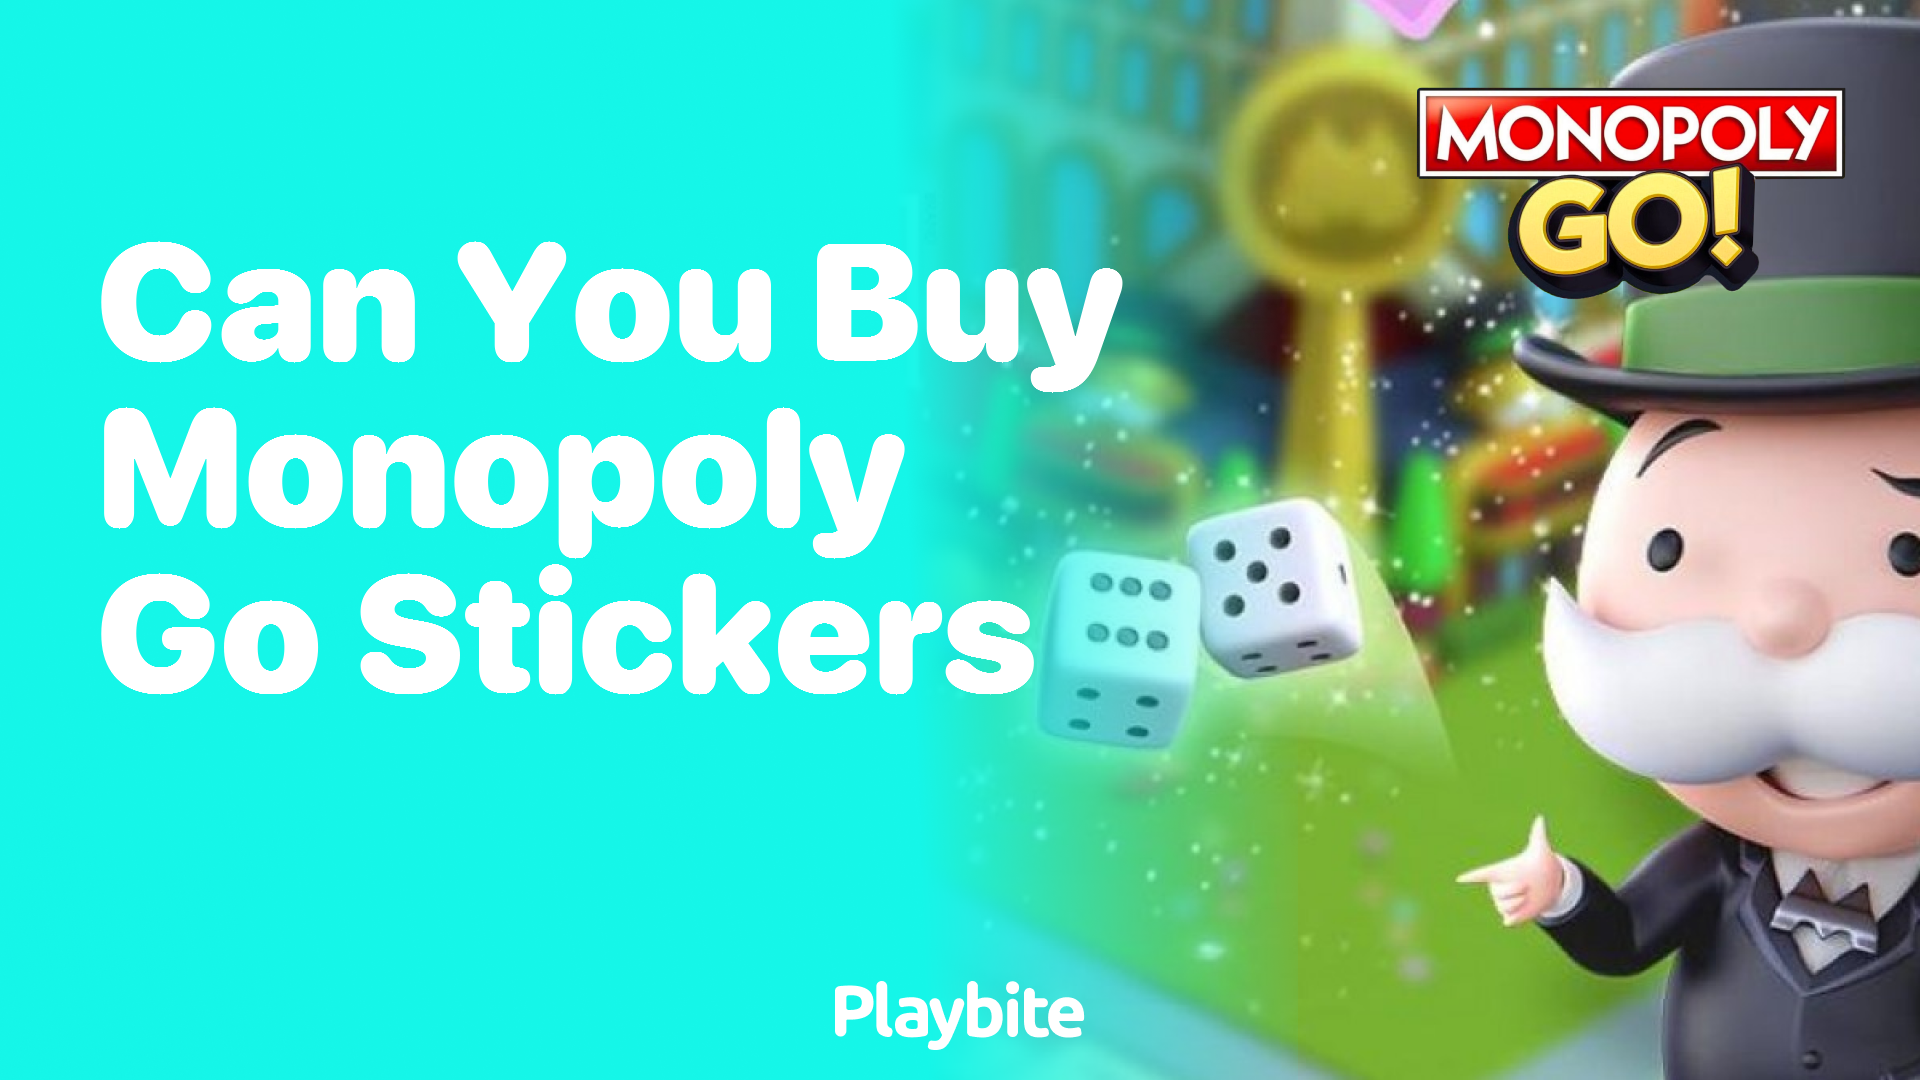 Can You Buy Monopoly Go Stickers?